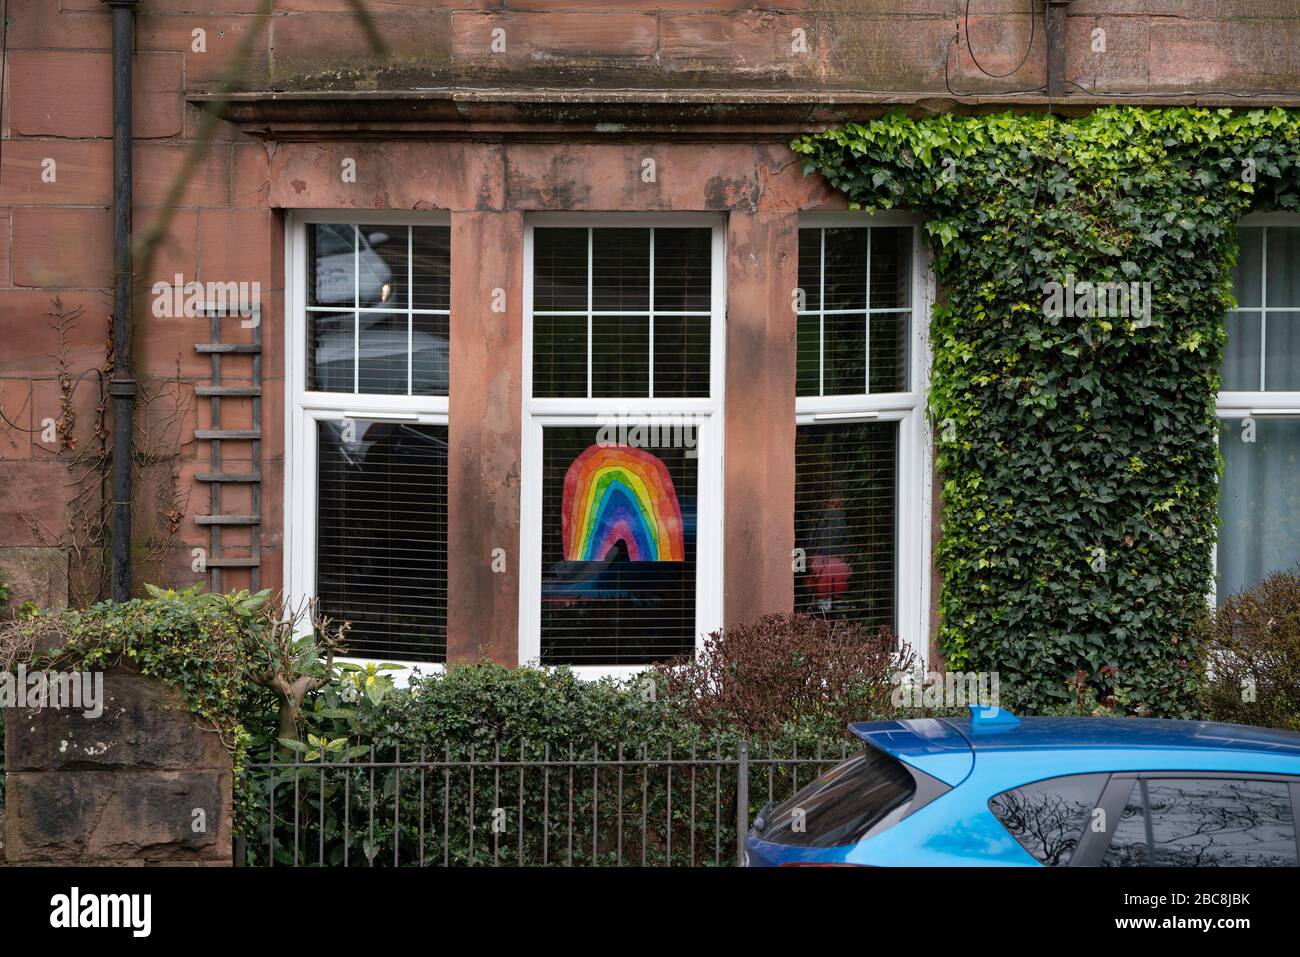 Glasgow, Scotland, UK. 3 April, 2020. Images from the south side of Glasgow at the end of the second week of Coronavirus lockdown. Pictured; hand drawn rainbows and messages in windows of flat in Shawlands. Iain Masterton/Alamy Live News Stock Photo